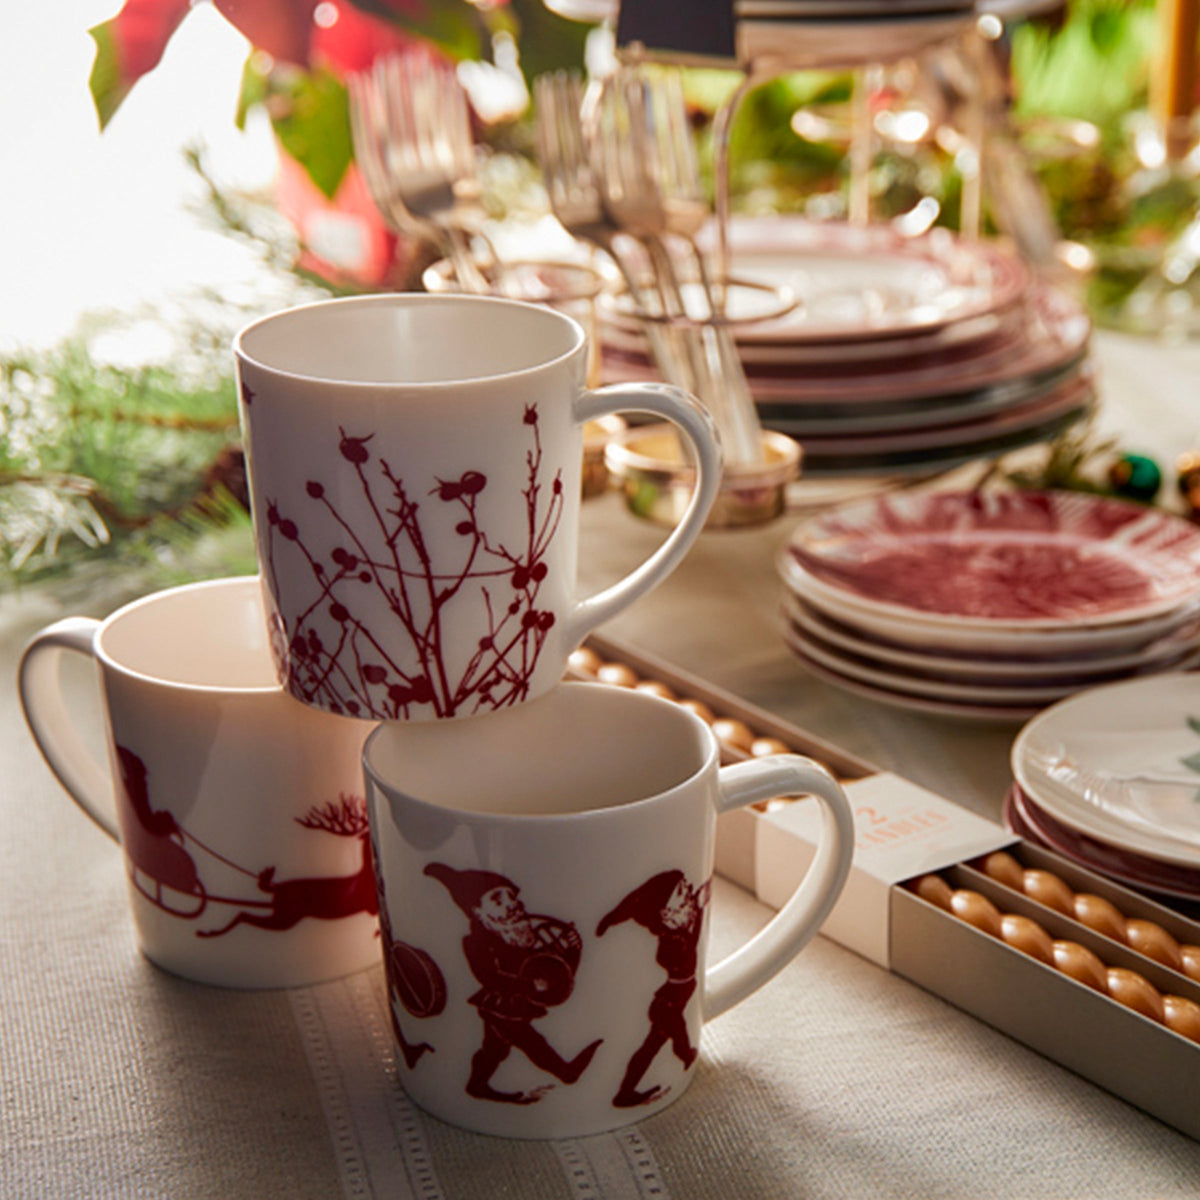 An Elves Mug Red from Caskata Artisanal Home, perfect as a holiday gift, is seen on a holiday table.